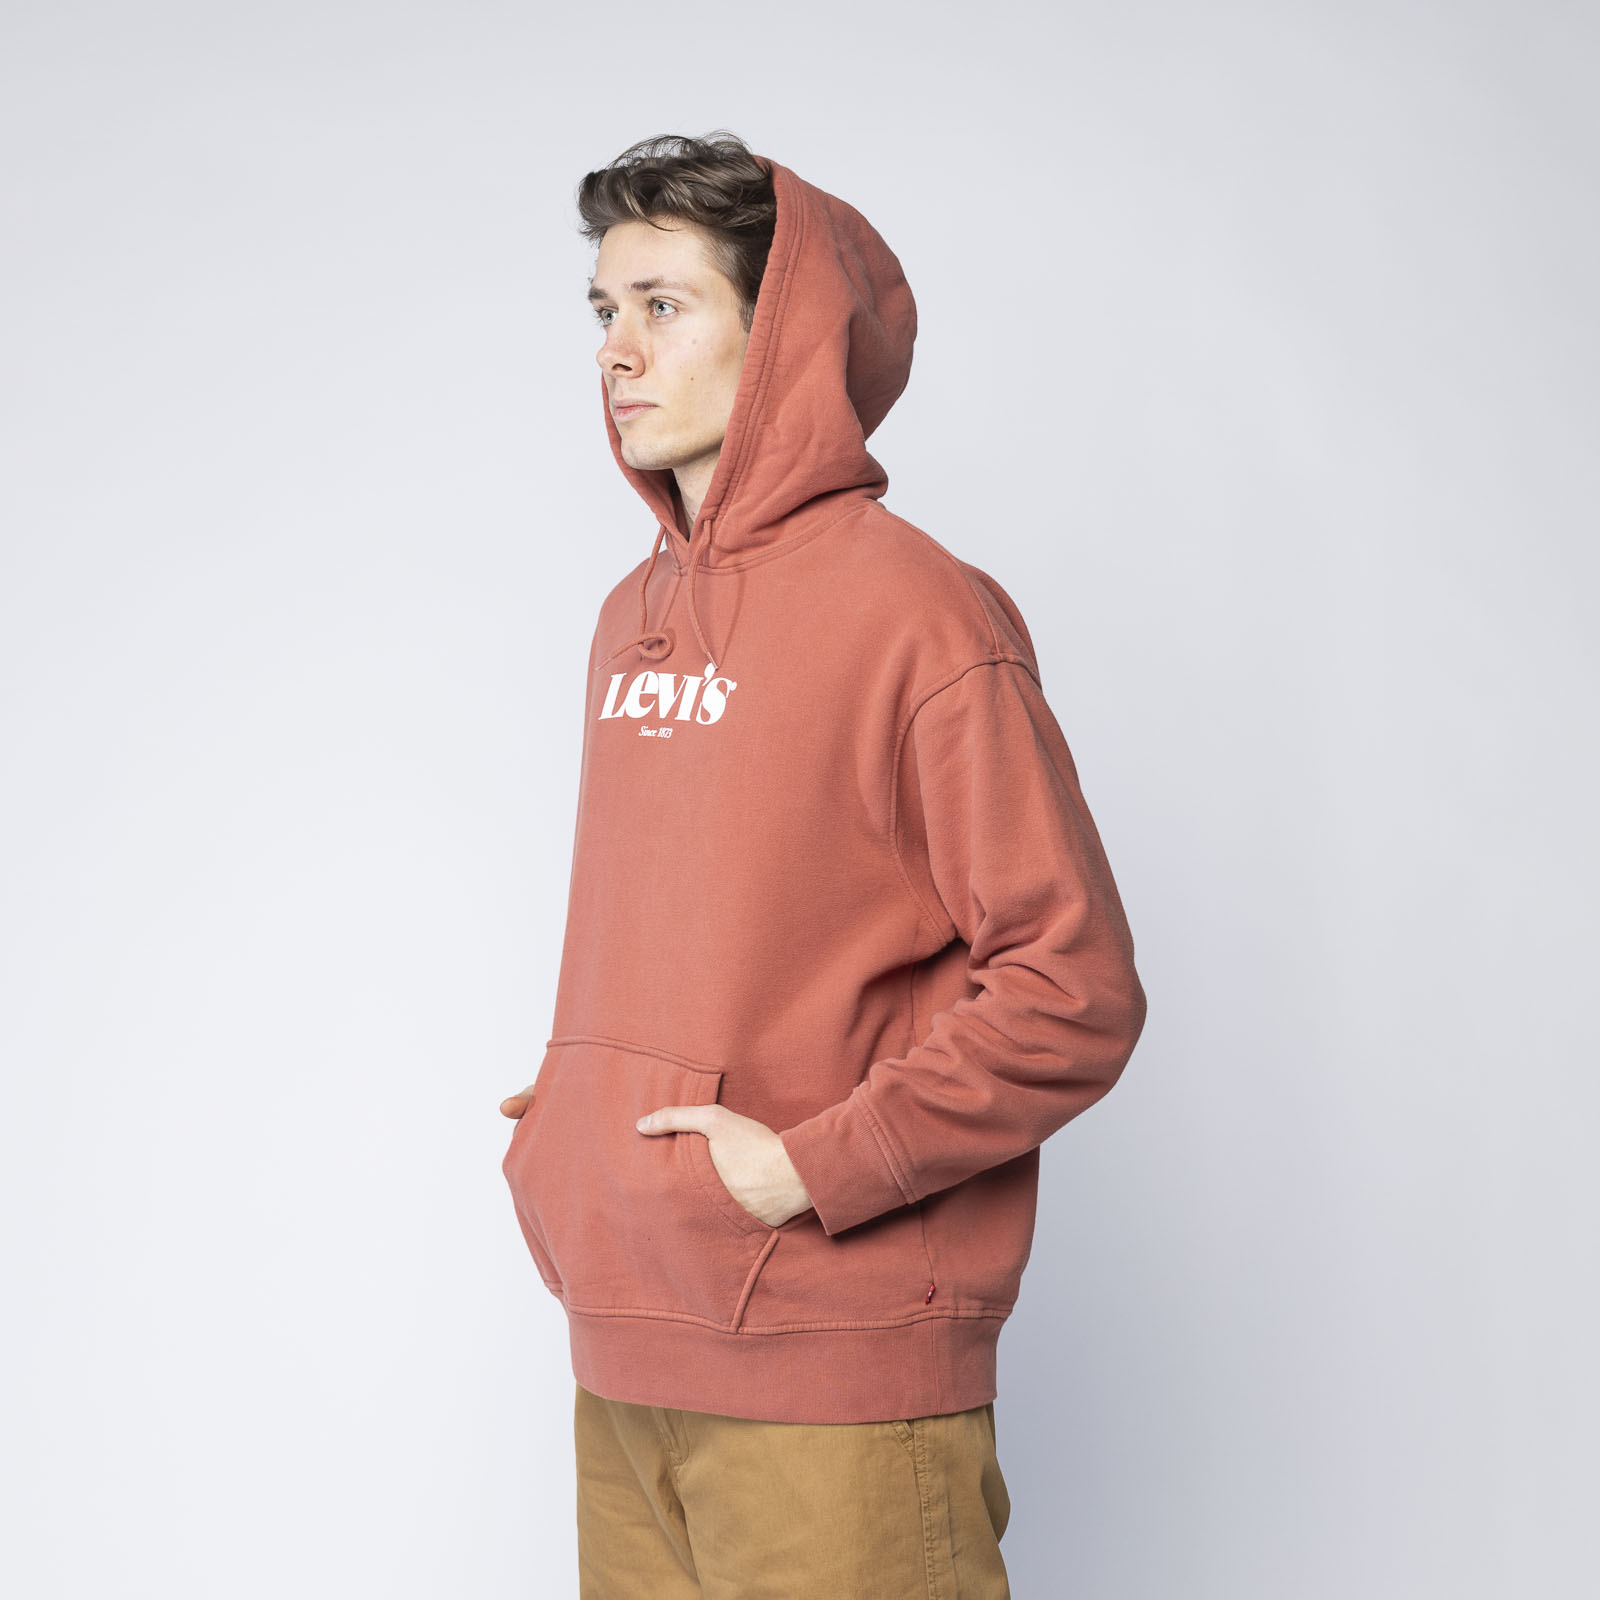 Levi's RELAXED GRAPHIC HOODIE MARSALA RED | Men's \ Men's clothing \  Sweatshirts Brands \ #Marki - 3 \ Levi's